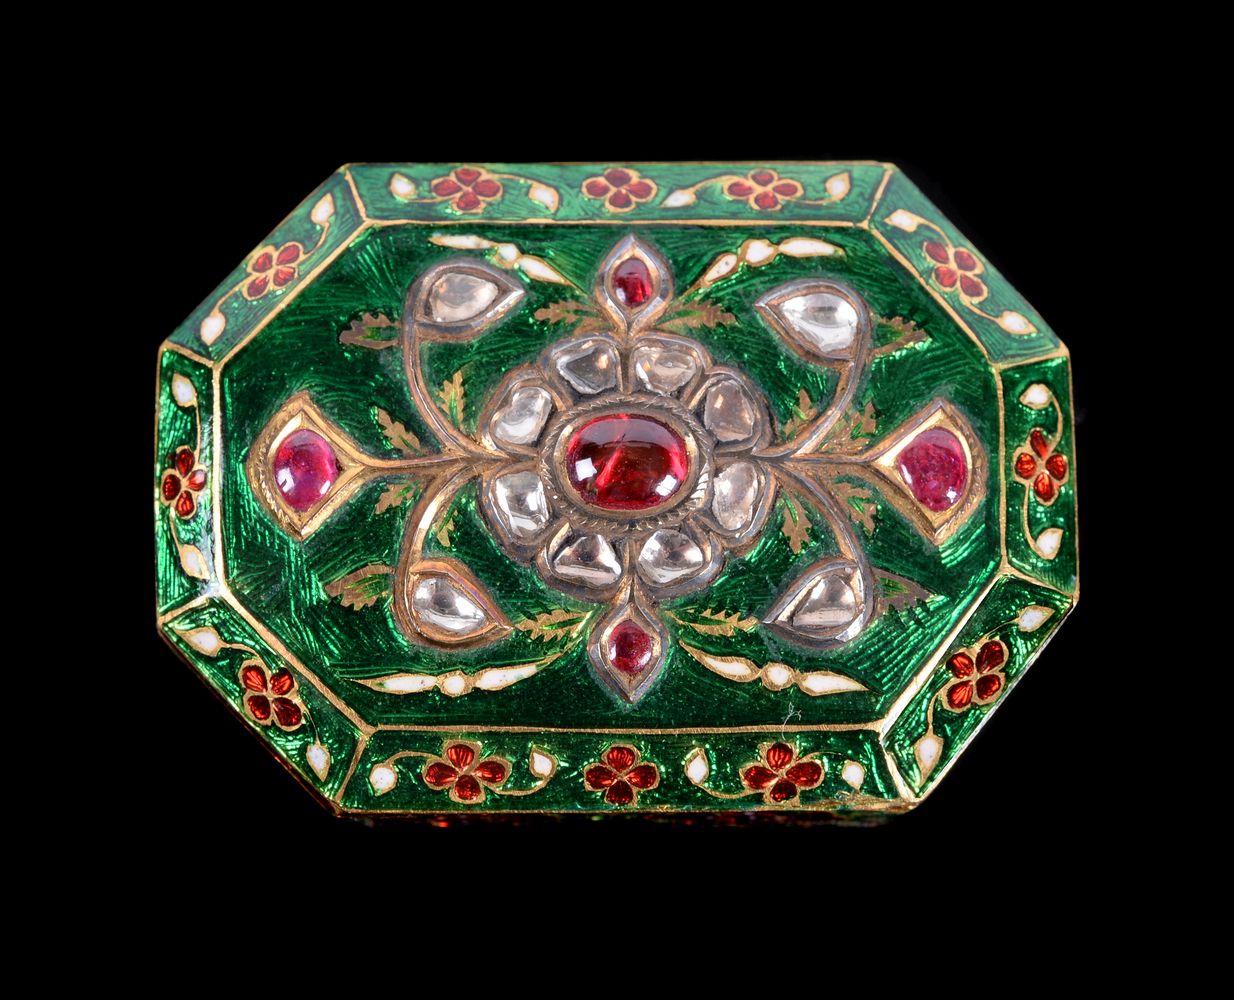 A Jaipur enamel and gold box - Image 2 of 4